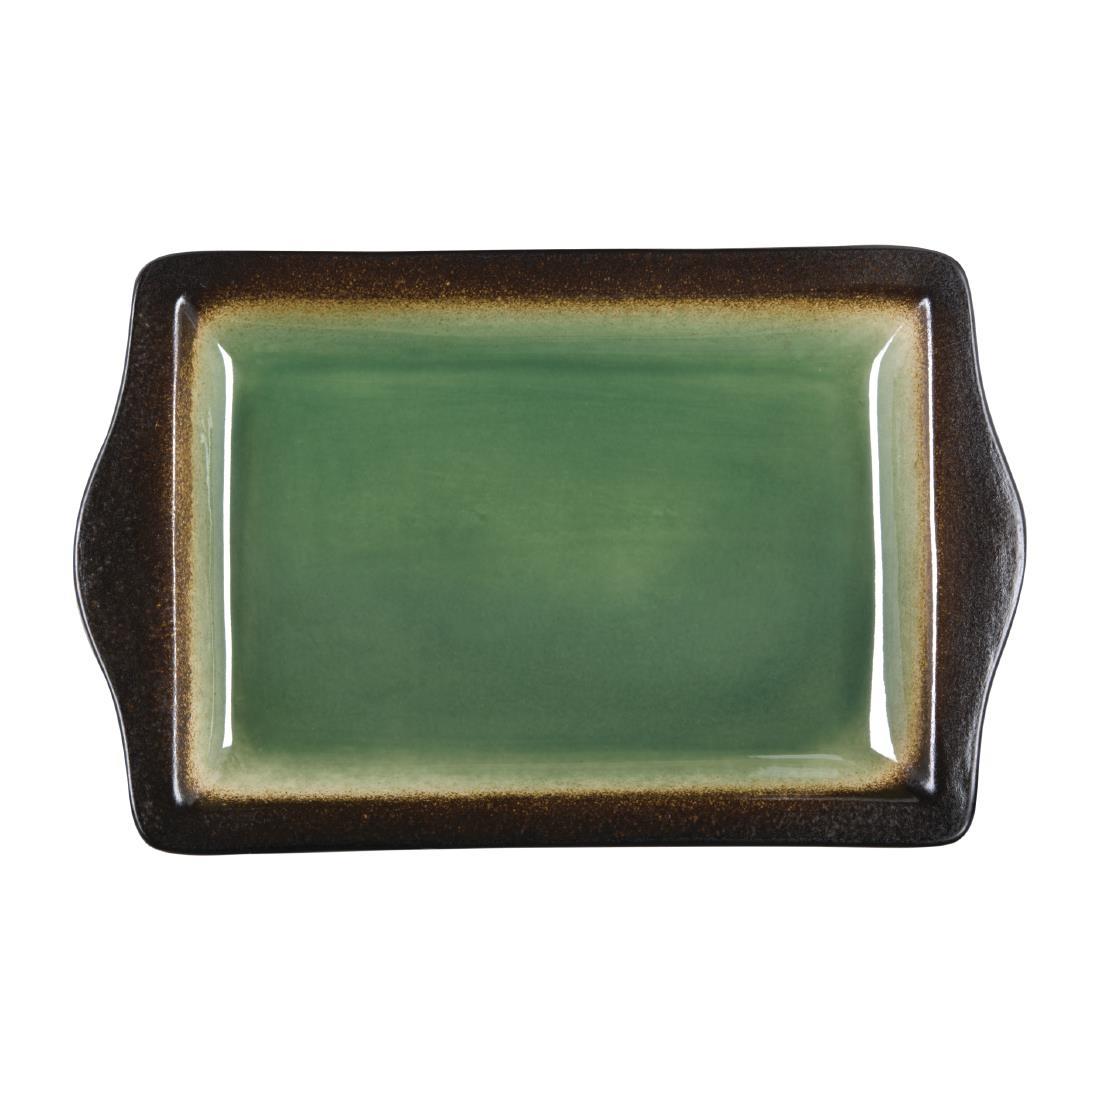 Olympia Nomi Platter Green 283mm (Pack of 6) - HC531  - 1